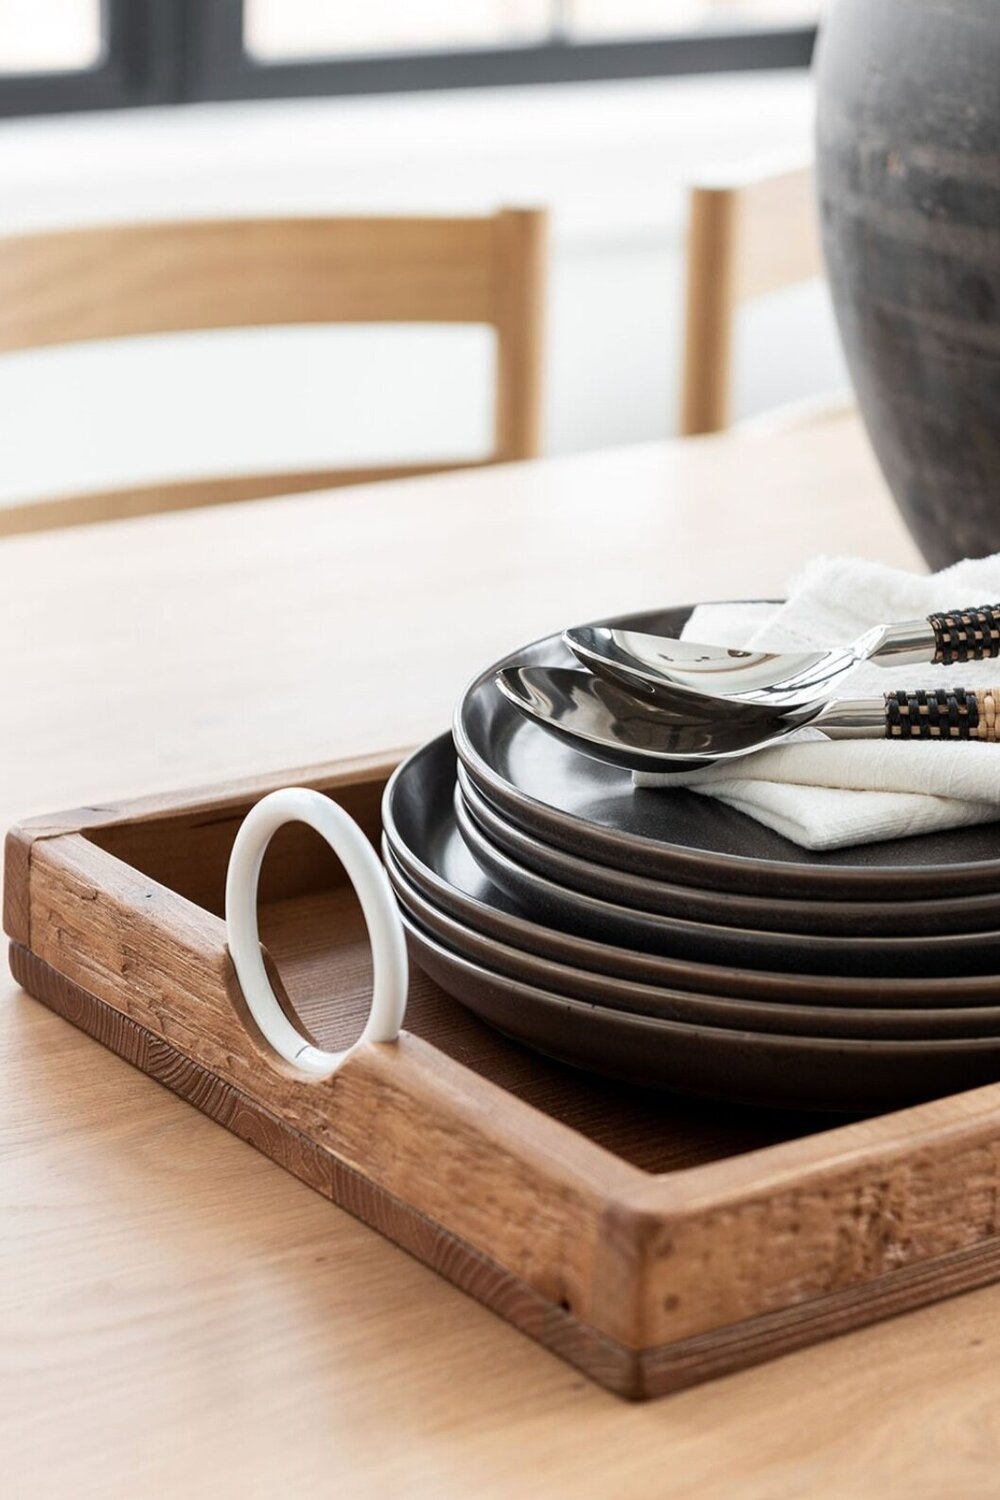 5 Kitchen Essentials To Stock Up On Before The Holidays